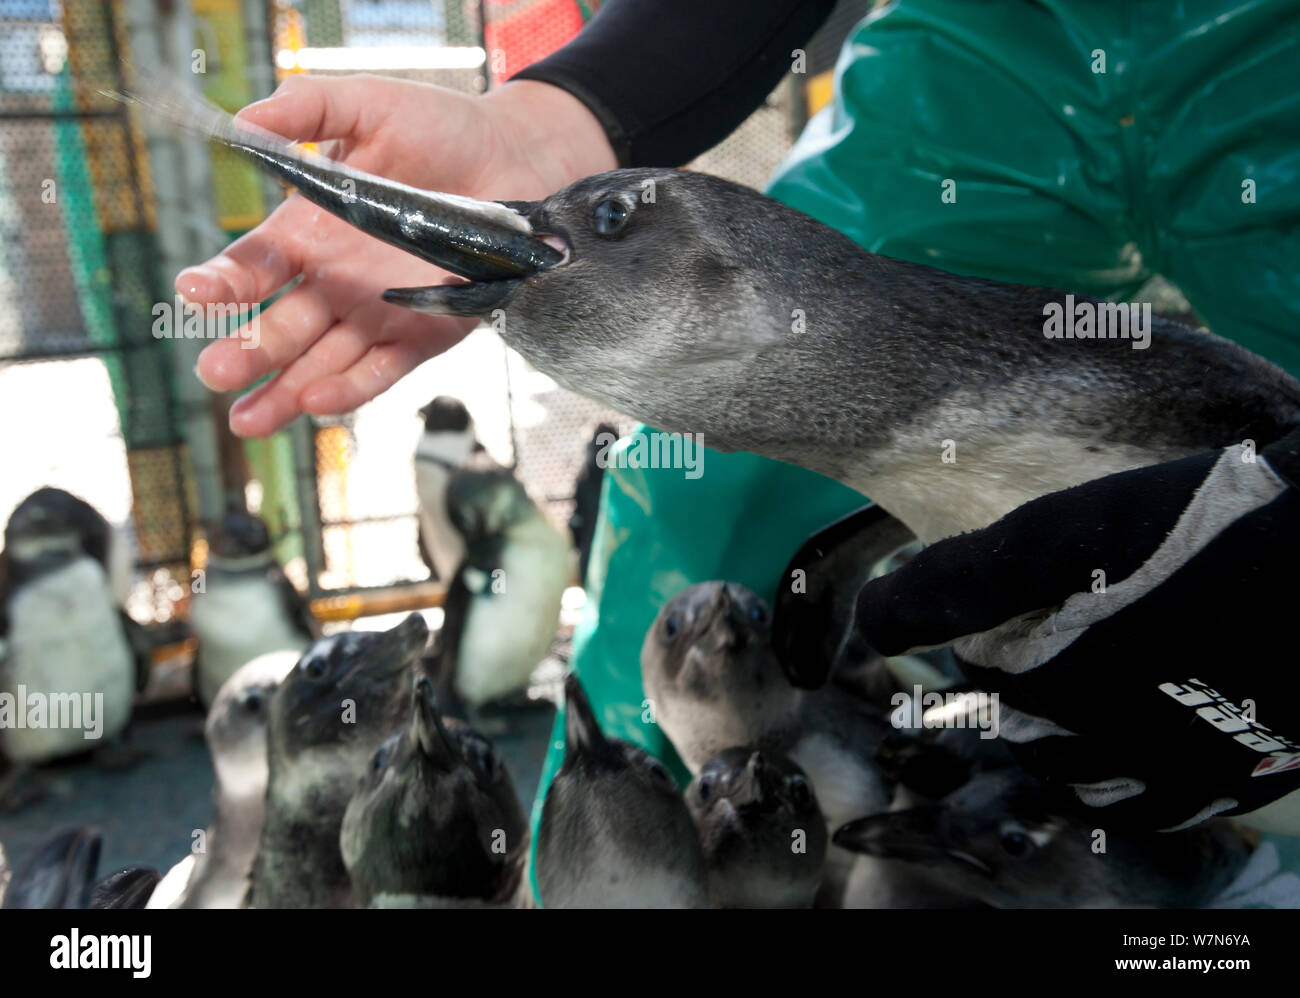 Black footed penguin (Spheniscus demersus) being hand fed as part of rehabilitation at Southern African Foundation for the Conservation of Coastal Birds (SANCCOB), Cape Town, South Africa 2011 Stock Photo